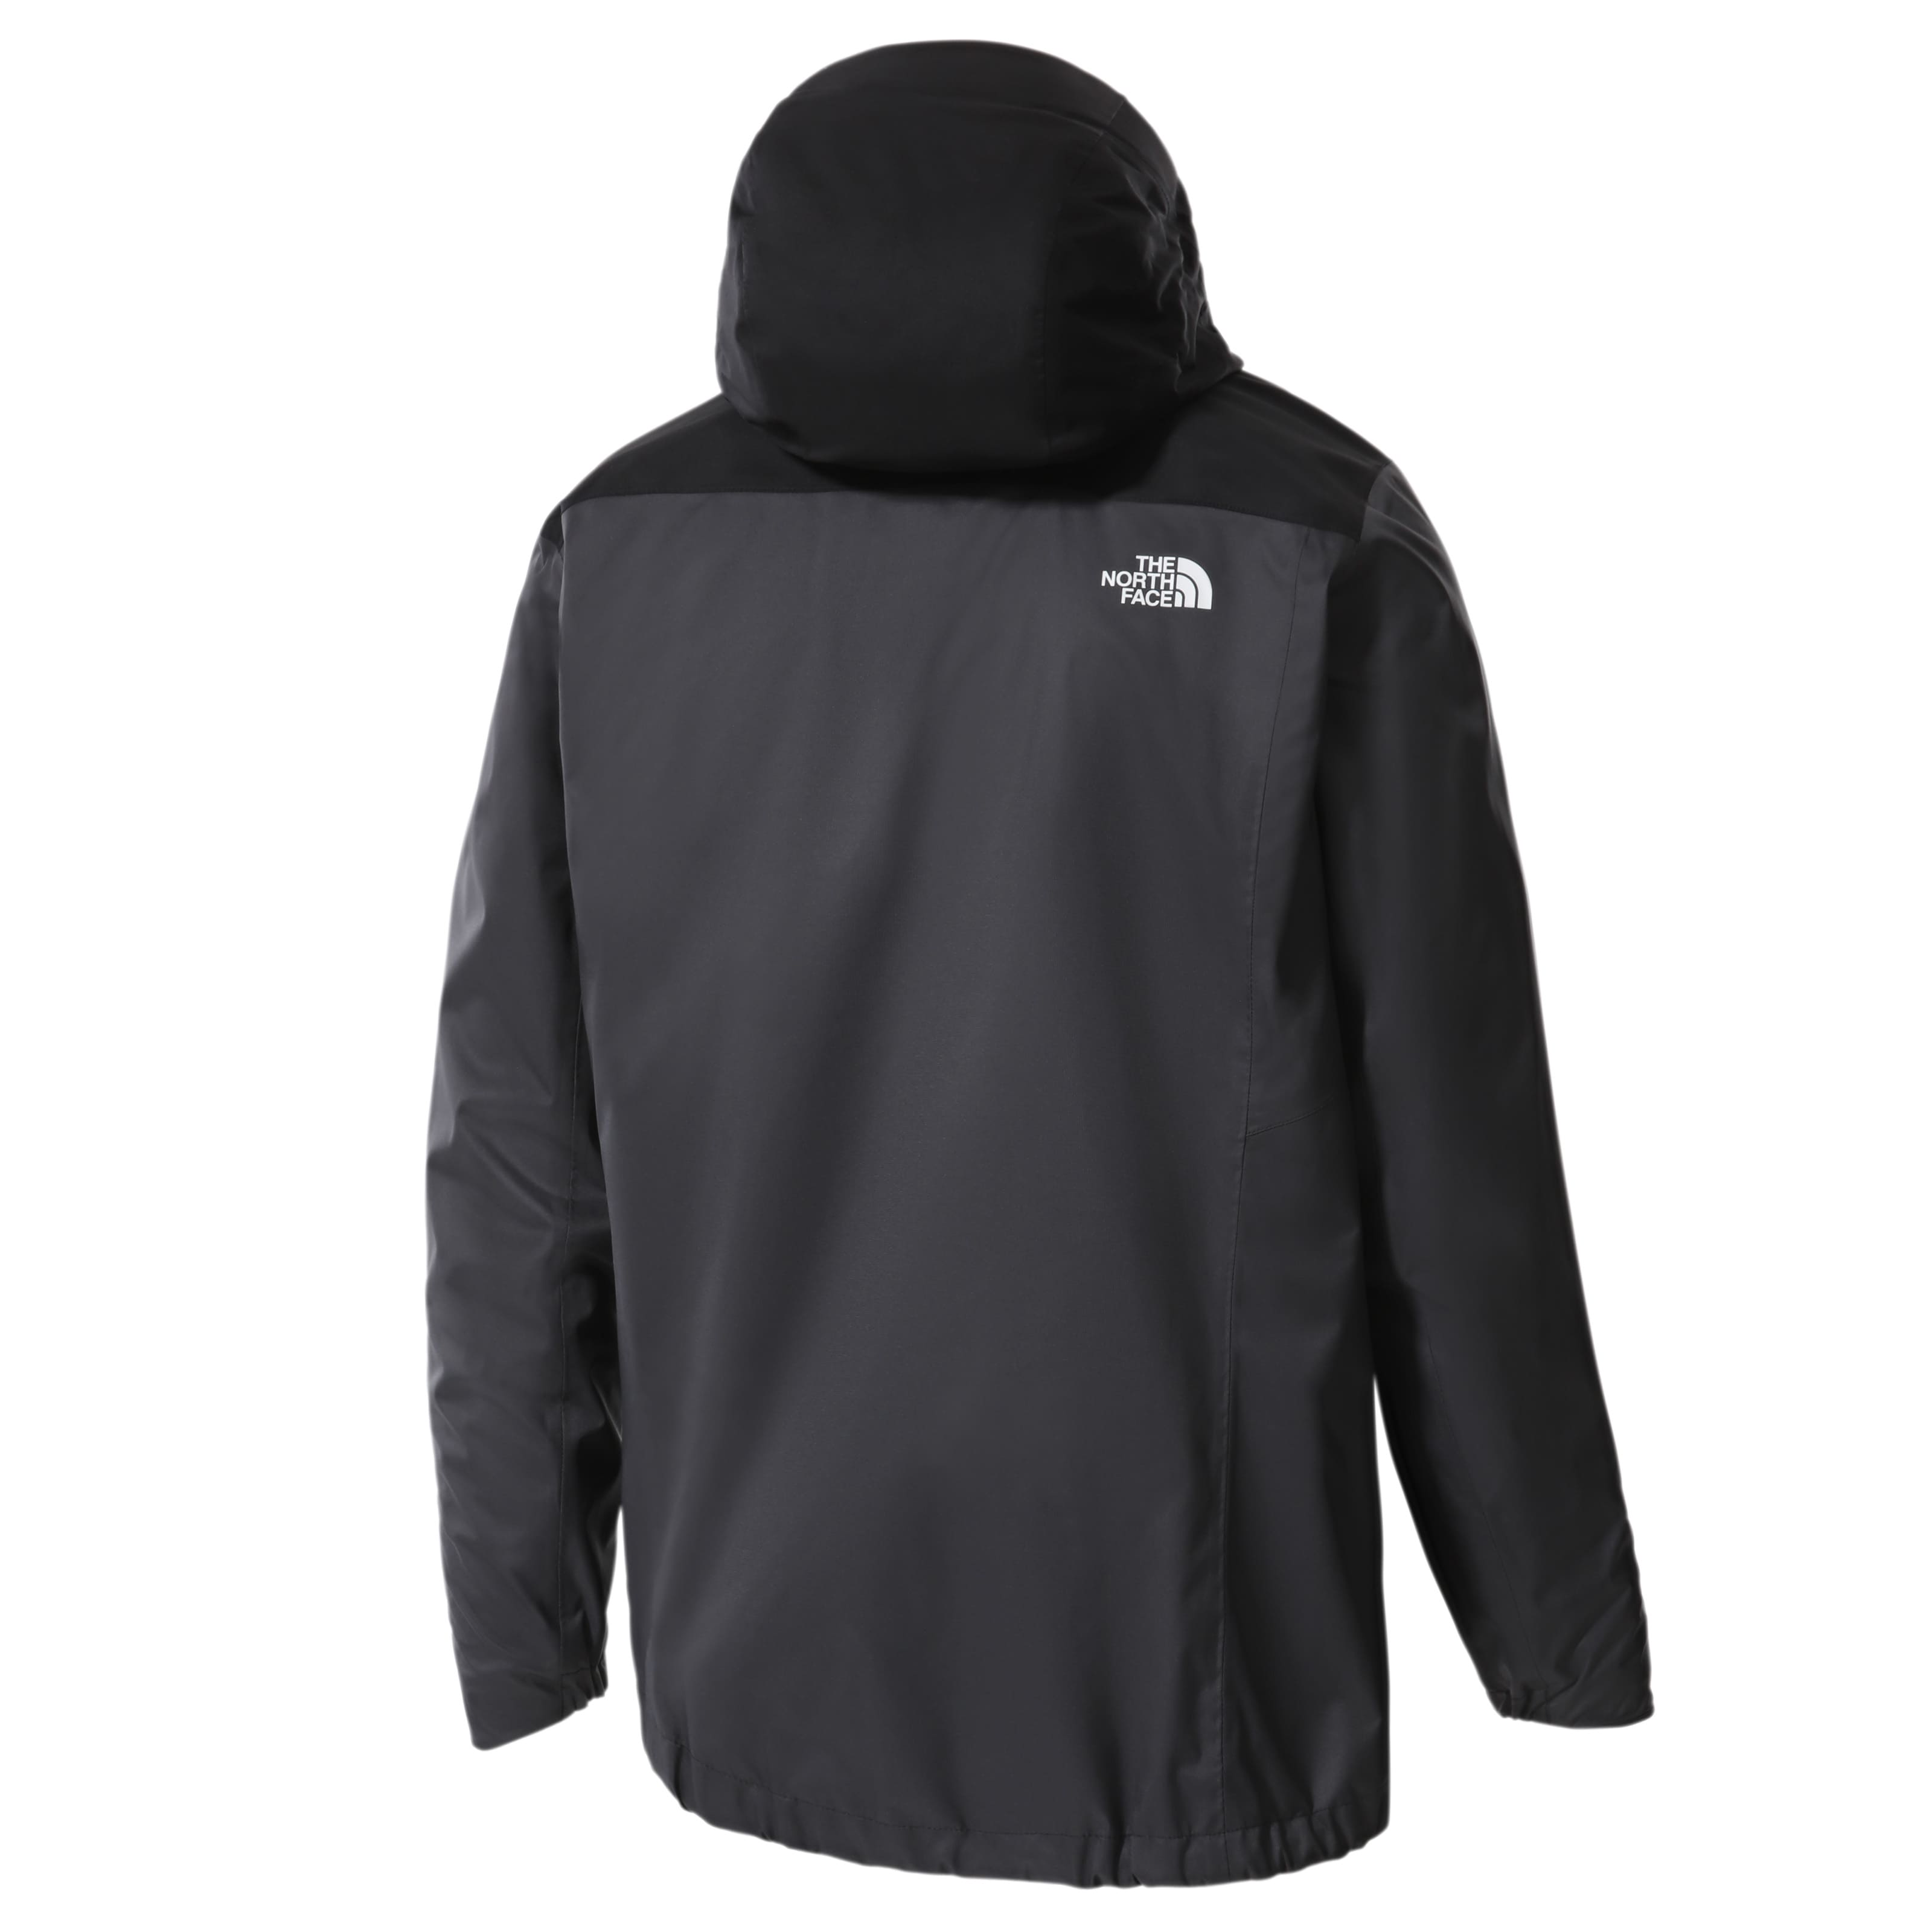 The North Face Jas Quest Zip